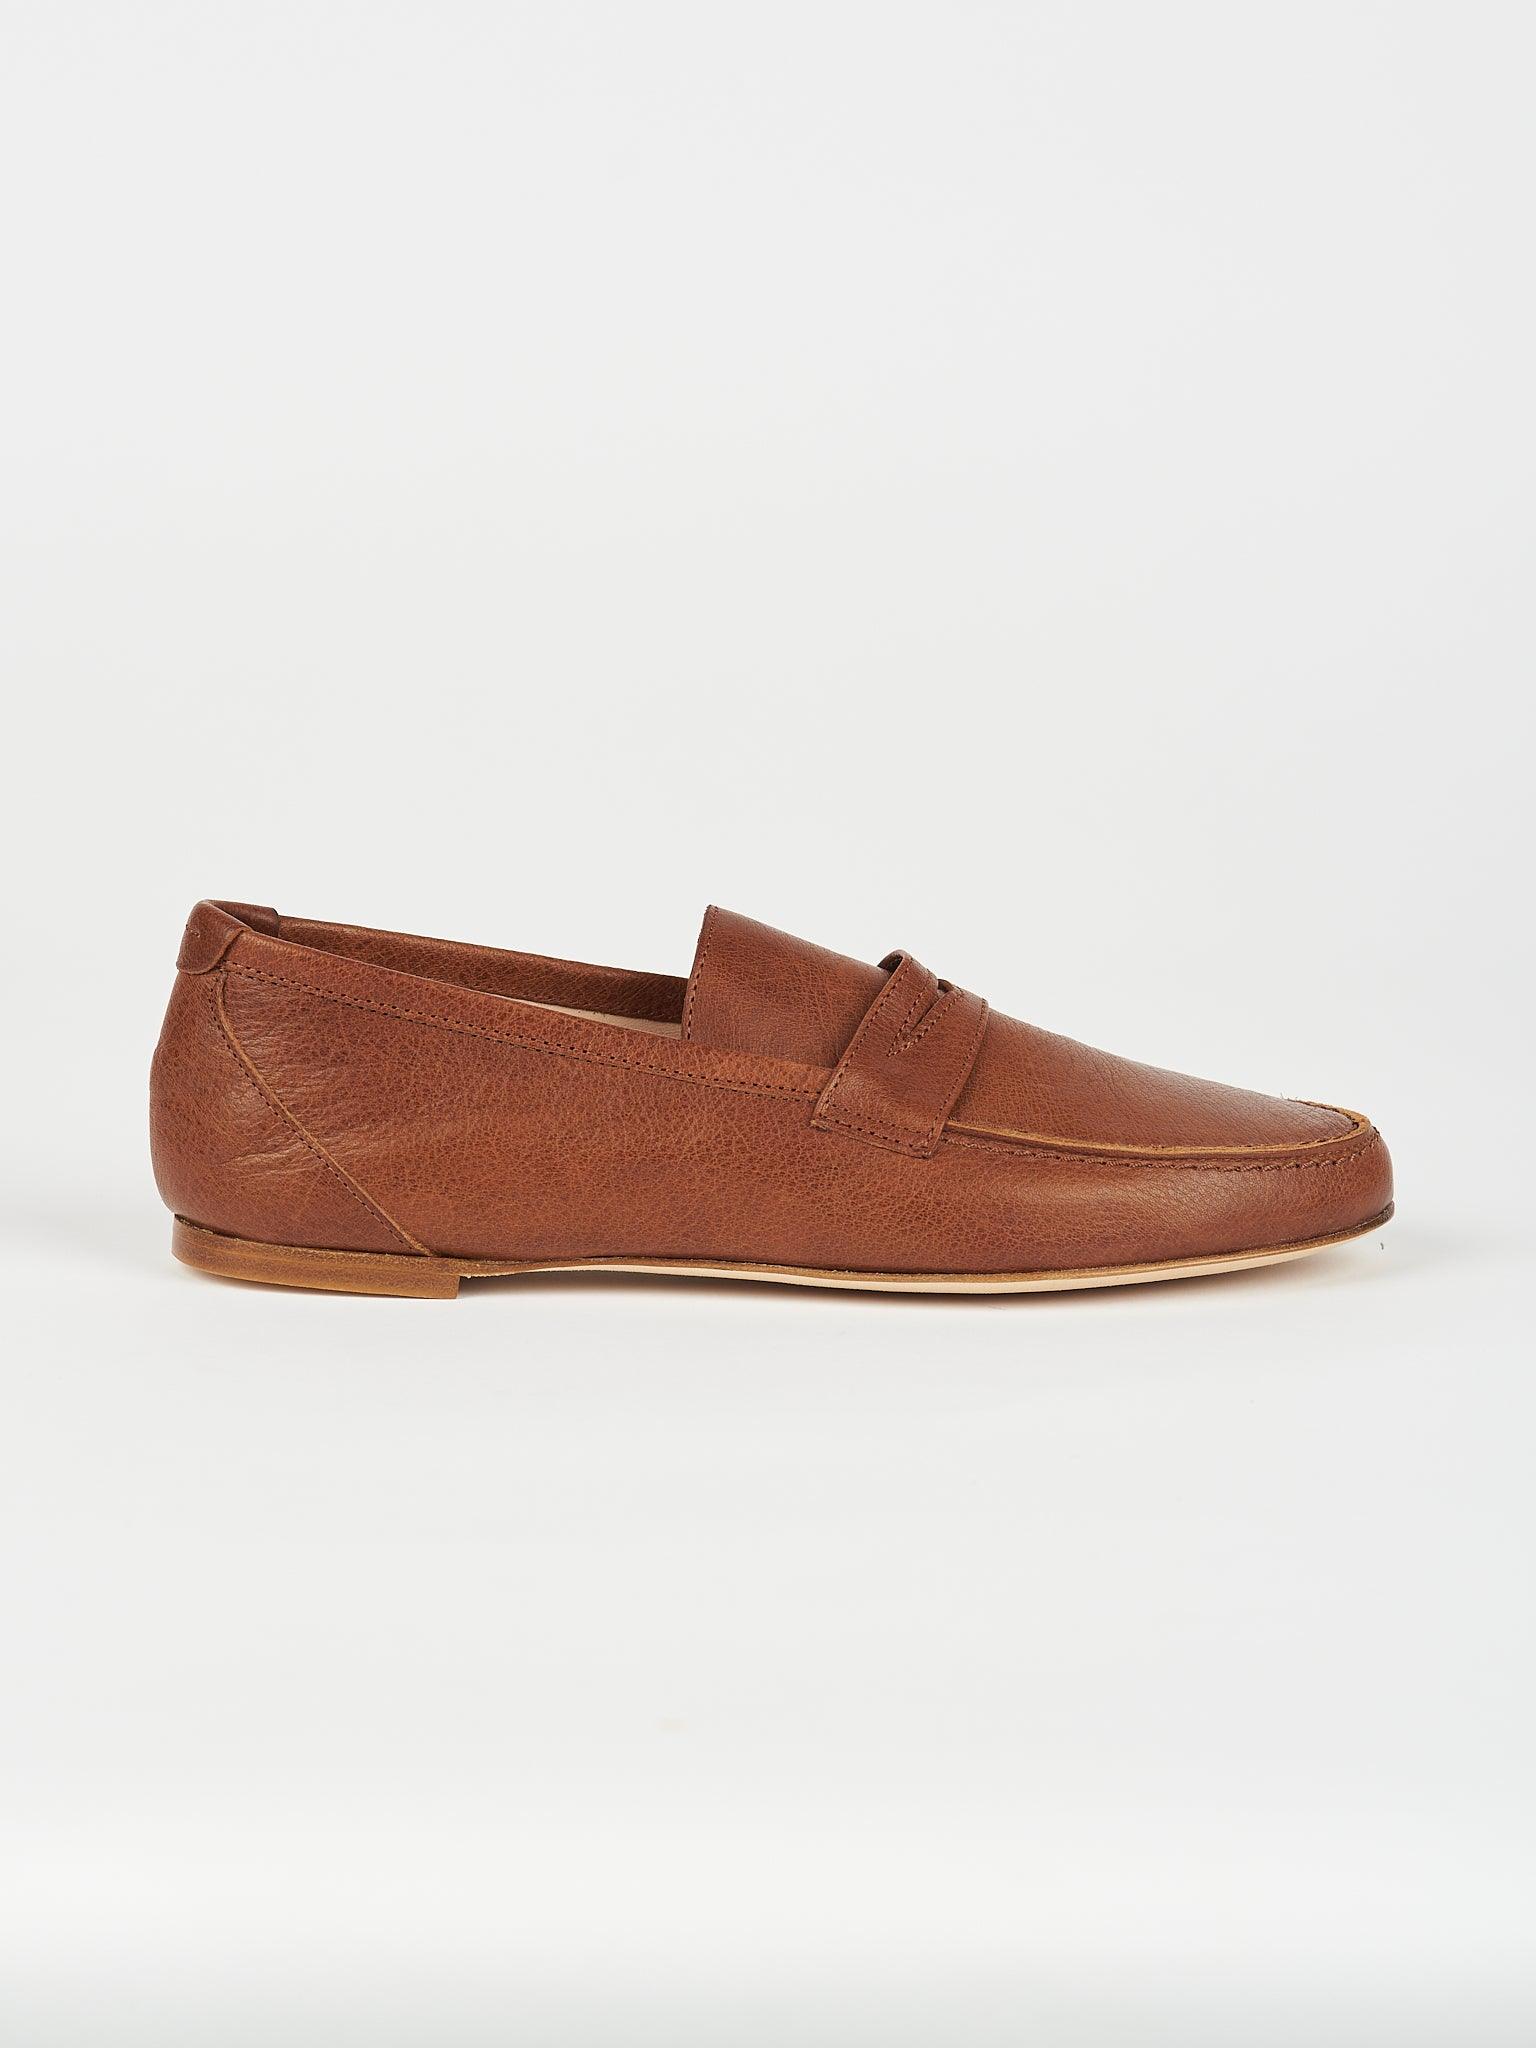 The Penny Loafer in Brown Side View